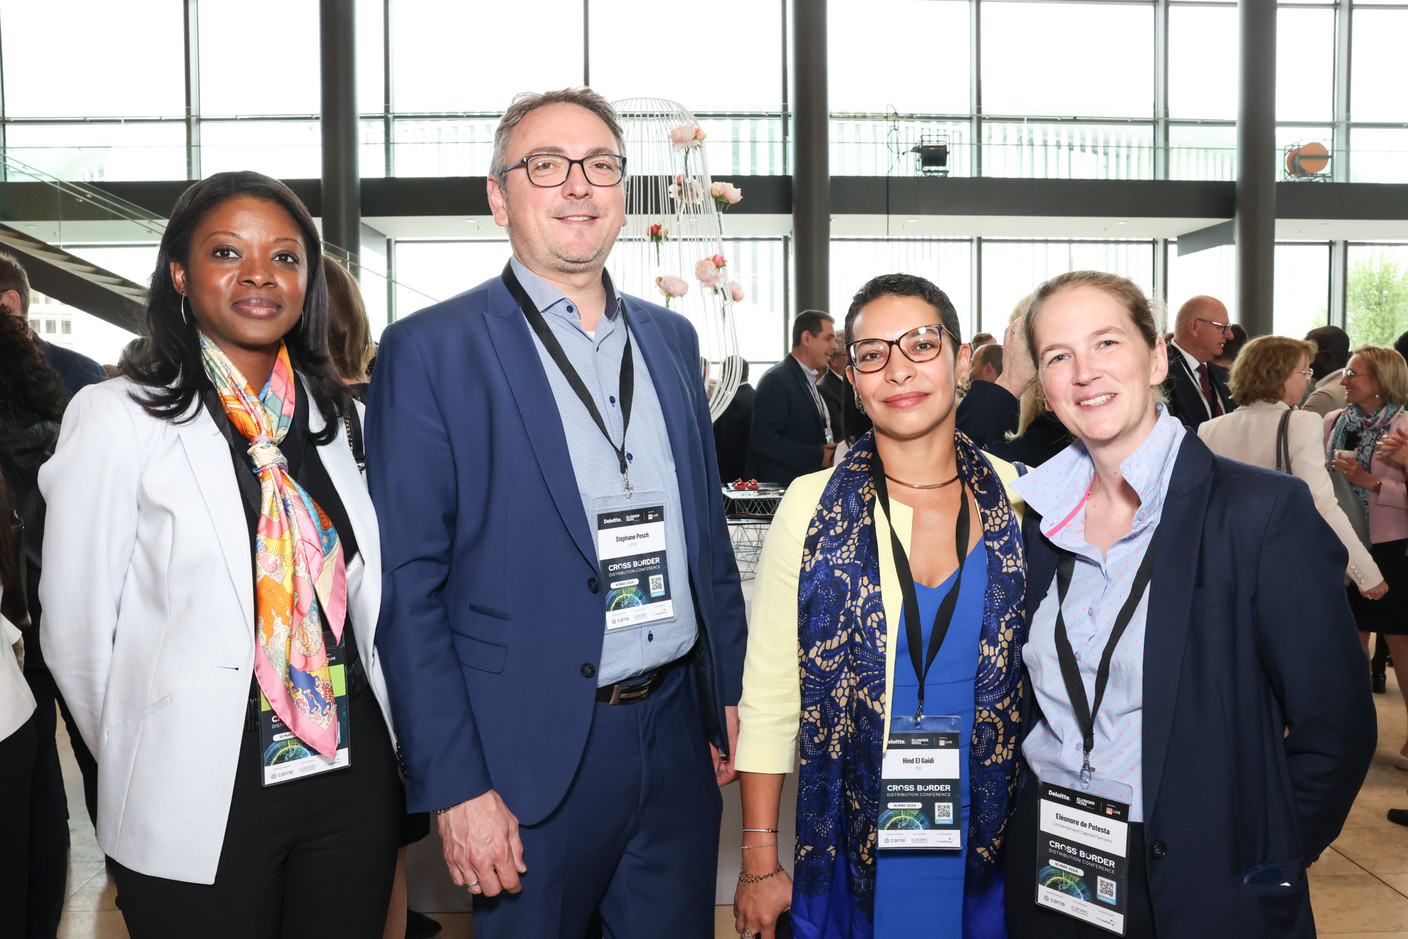 Stephane Pesch at the Luxembourg Private Equity & Venture Capital Association (second from left), Hind El Gaidi at ICG (second from right), Eléonore de Potesta at Converginvest Capital Partners. Photo: Marie Russillo/Maison Moderne